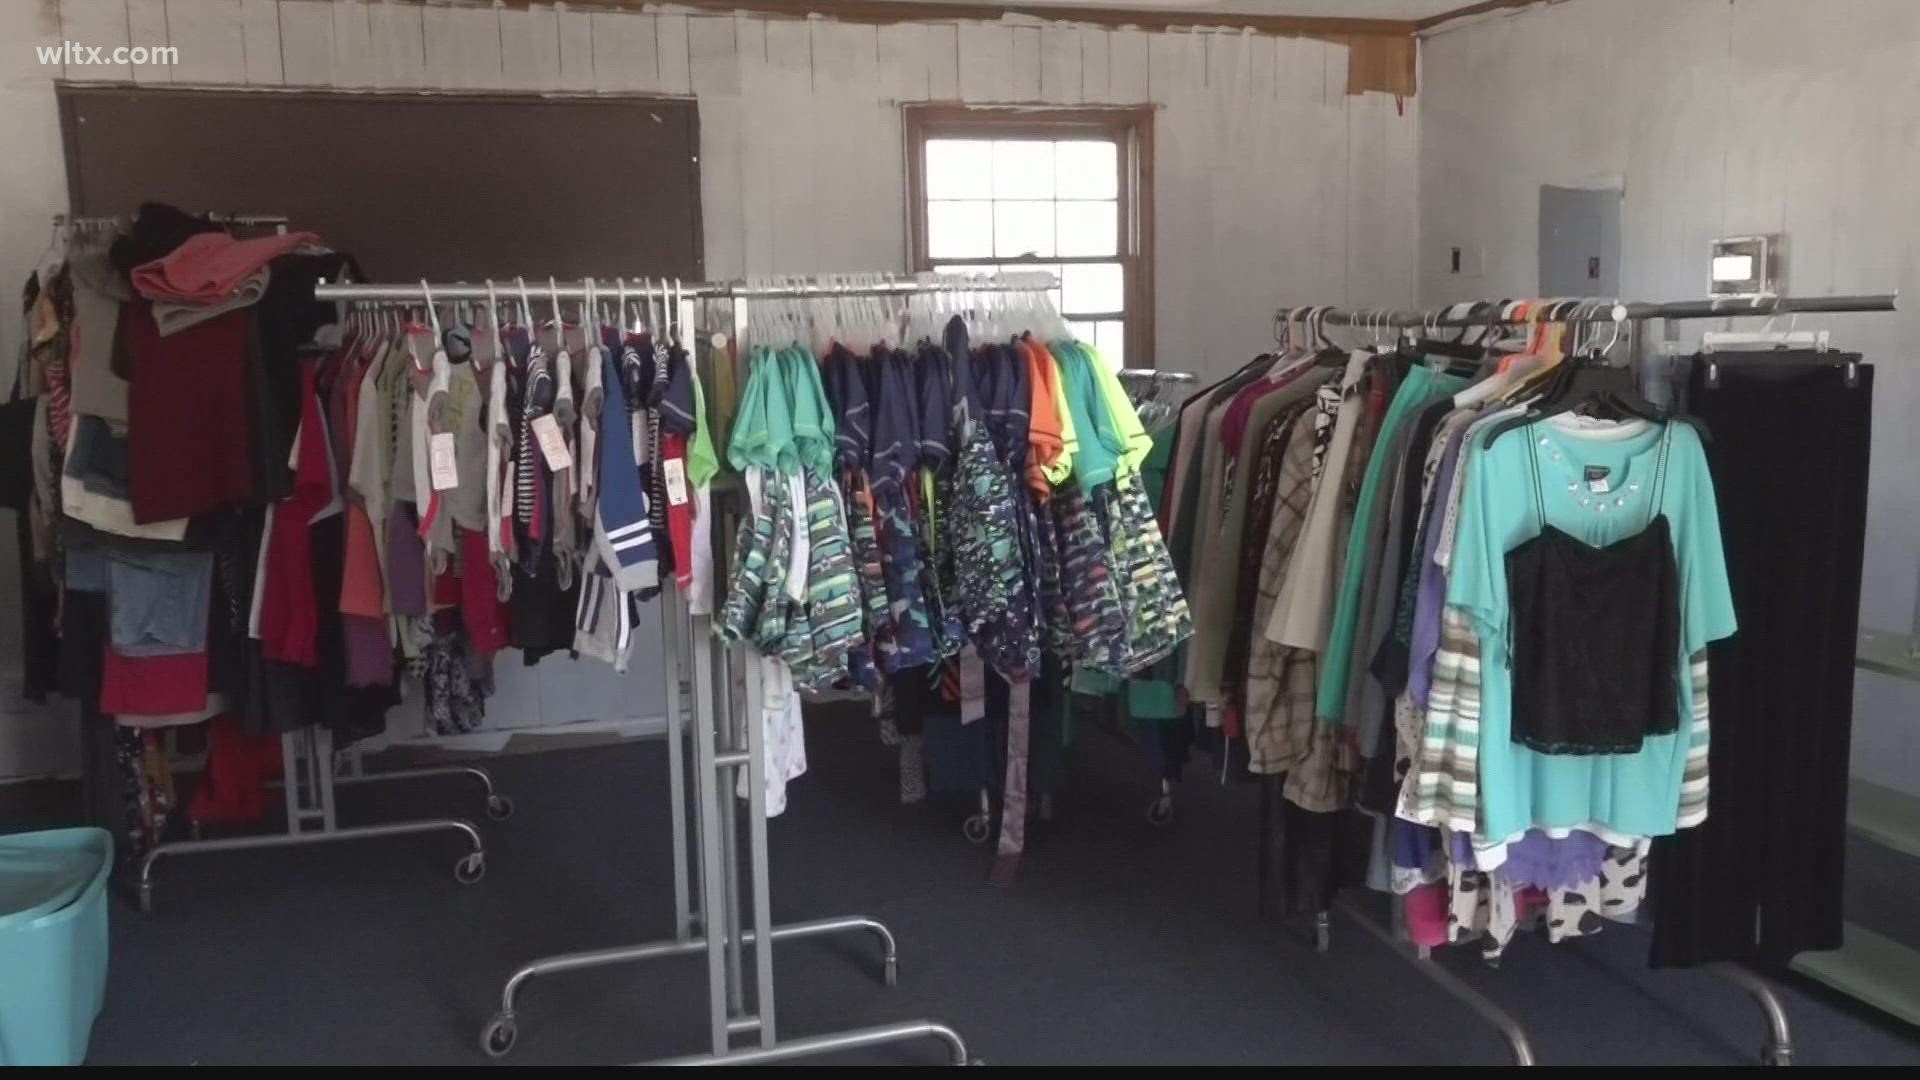 The Kershaw County Sheriff's Office and Sistercare have partnered to create a free clothing closet for victims of domestic violence.